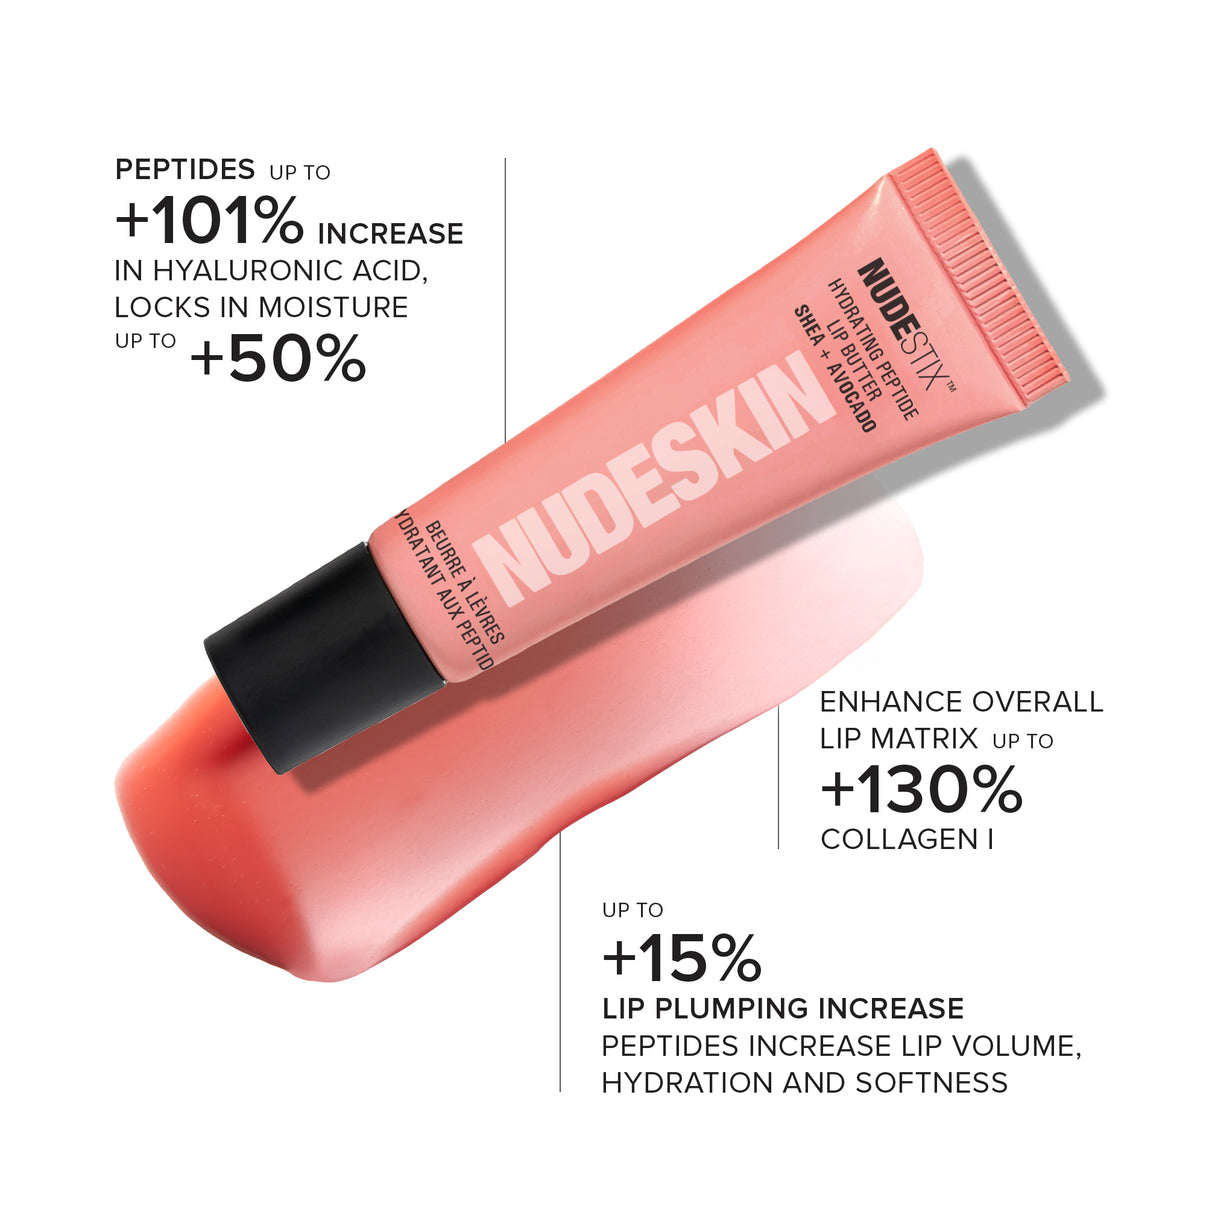 PEPTIDES UP TO +101% INCREASE IN HYALURONIC ACID, LOCKS IN MOISTURE UPTO +50% NUDESTIX™ HYDRATING PEPTIDE LIP BUTTER ENHANCE OVERALL LIP MATRIX UP TO +130% COLLAGEN I UP TO +15% LIP PLUMPING INCREASE PEPTIDES INCREASE LIP VOLUME, HYDRATION AND SOFTNESS